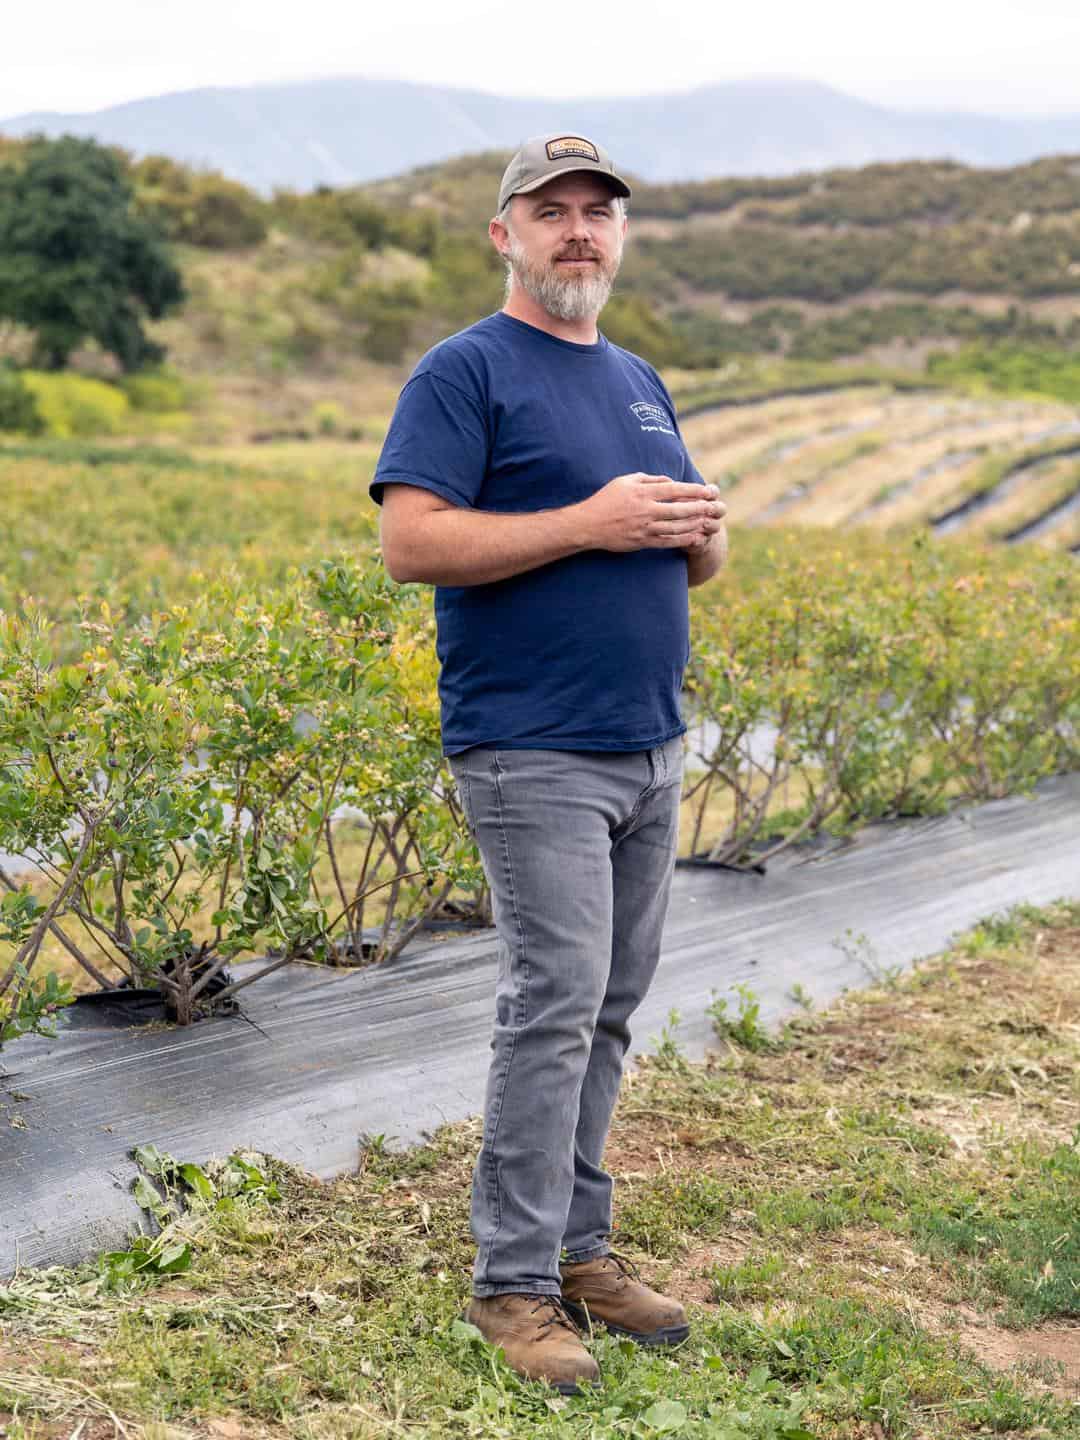 2023 Temecula Influencer Tour 
Fairfield Farms - Blueberry and Avocado Farm in Pauma Valley in San Diego County
Led by Spencer Steed
Photography by Hilary Rance
